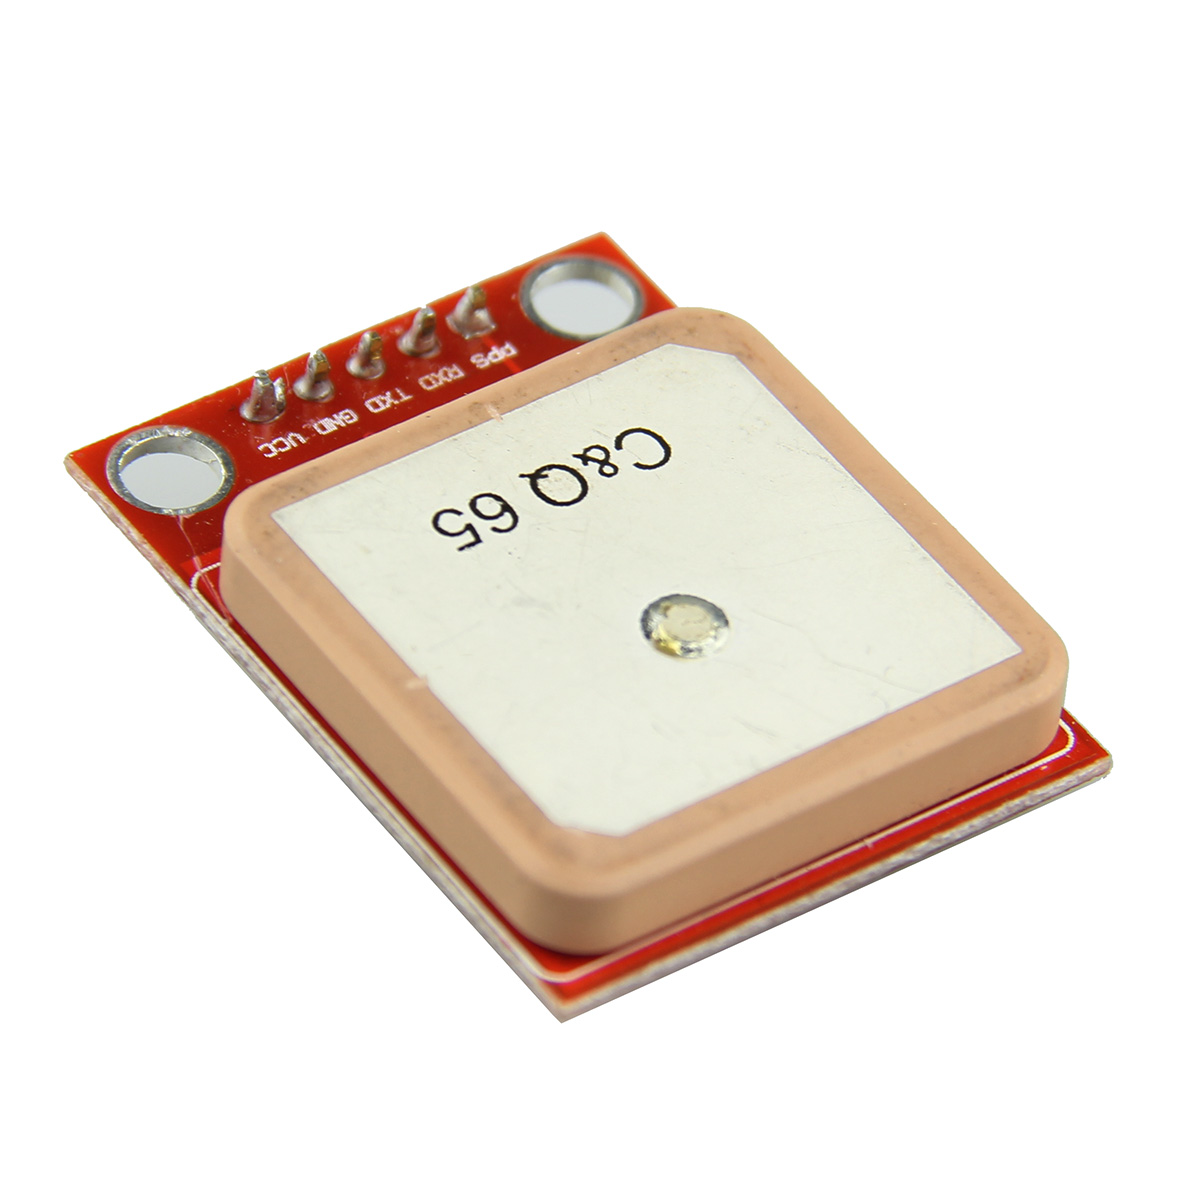 GPS-Module-GPS-NEO-6M-001-335V-Ceramic-Passive-Module-with-Antenna-Support-For-Raspberry-Pi-2B-976172